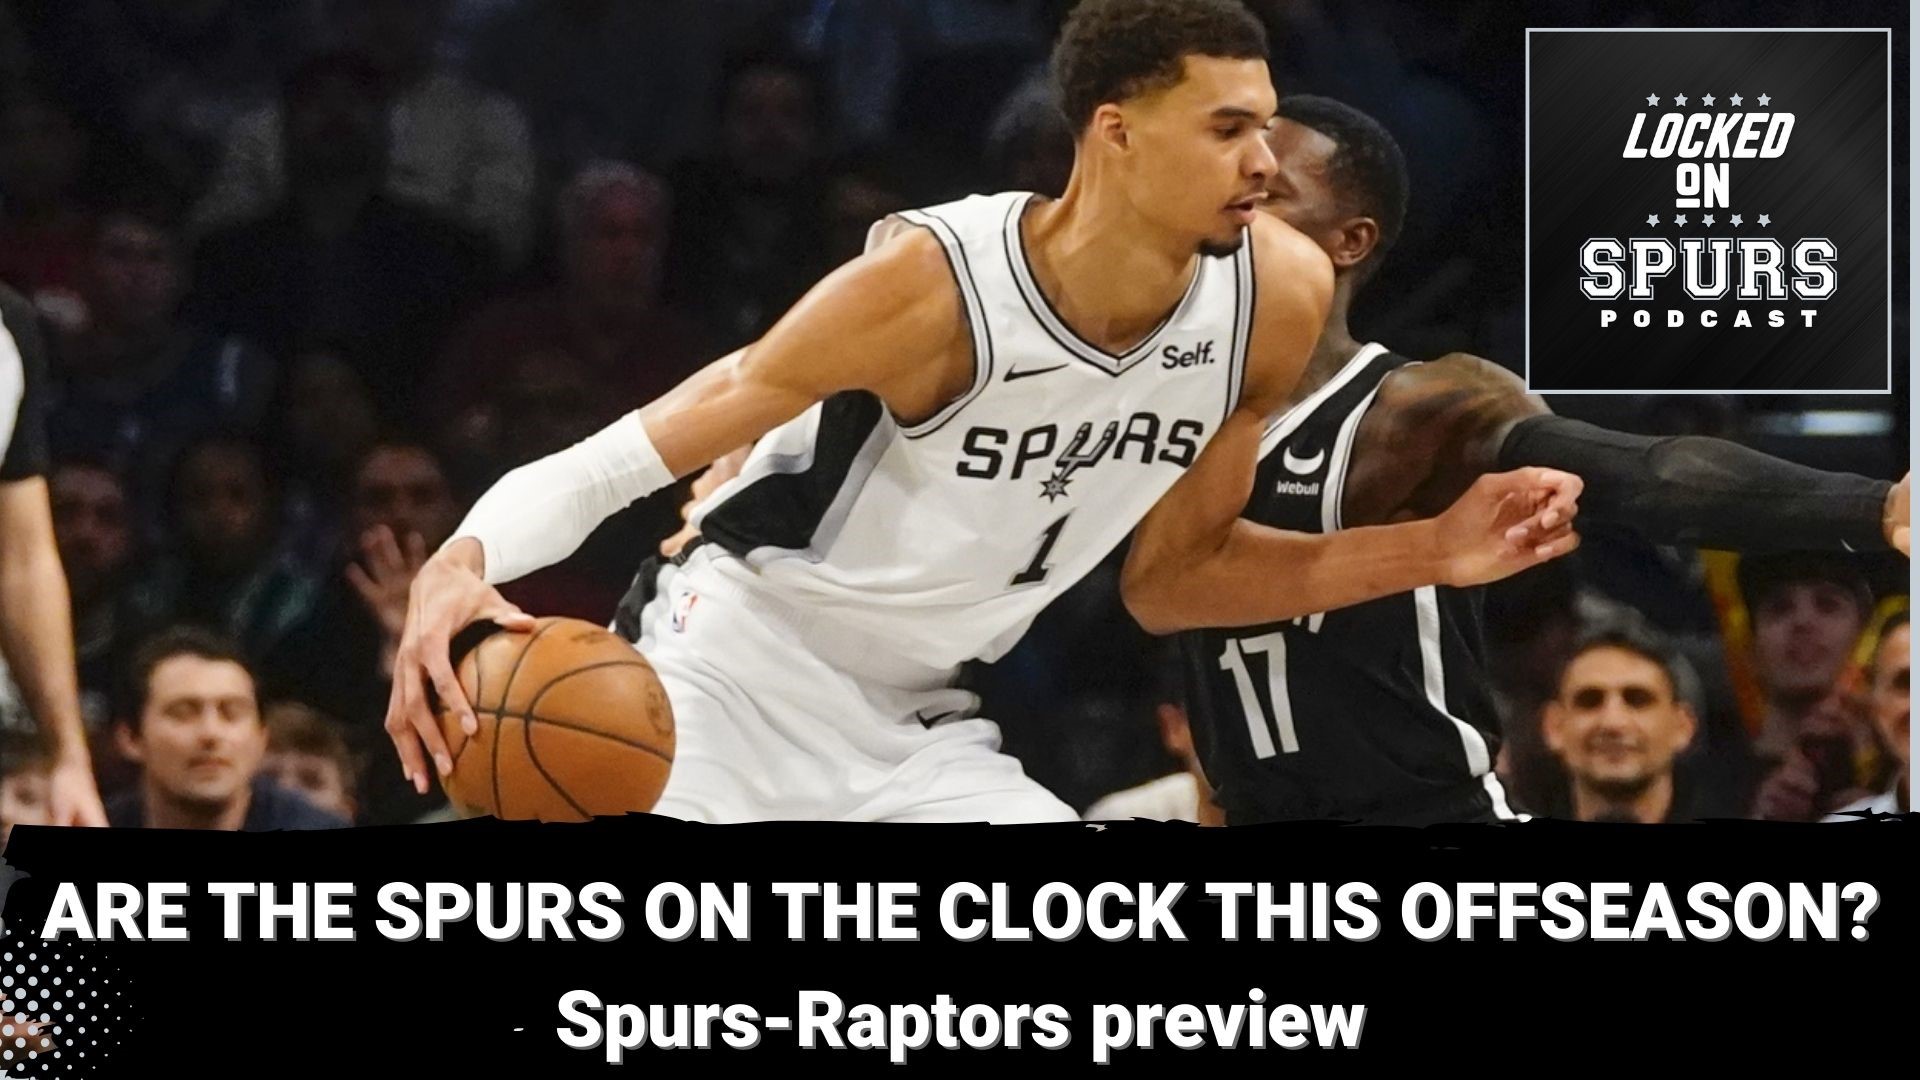 Also, previewing the Spurs-Raptors matchup.